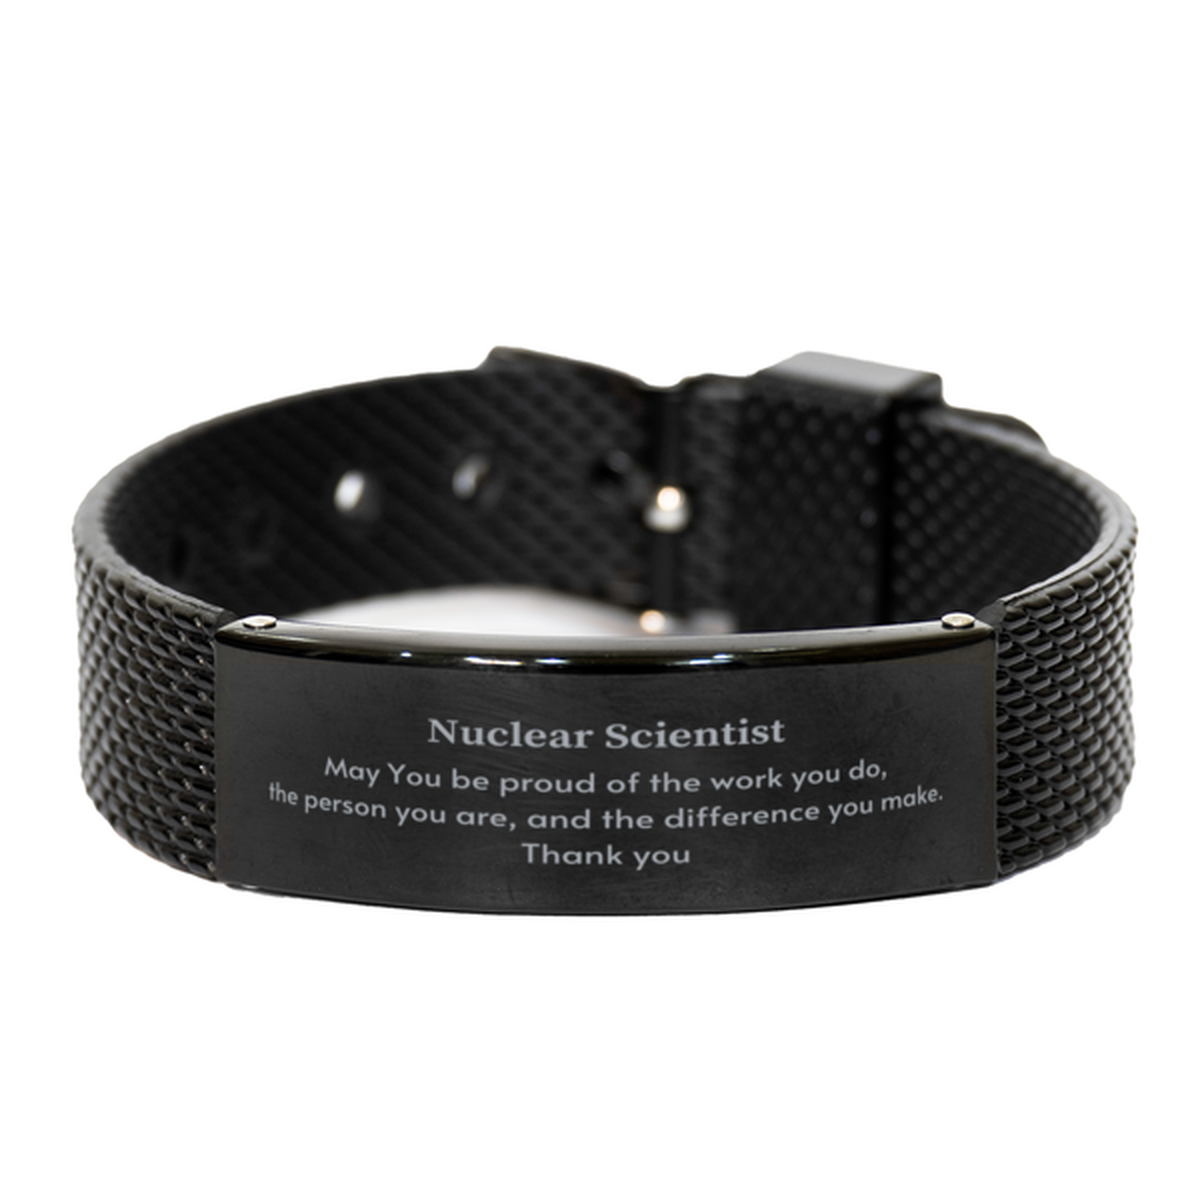 Heartwarming Black Shark Mesh Bracelet Retirement Coworkers Gifts for Nuclear Scientist, Nuclear Scientist May You be proud of the work you do, the person you are Gifts for Boss Men Women Friends